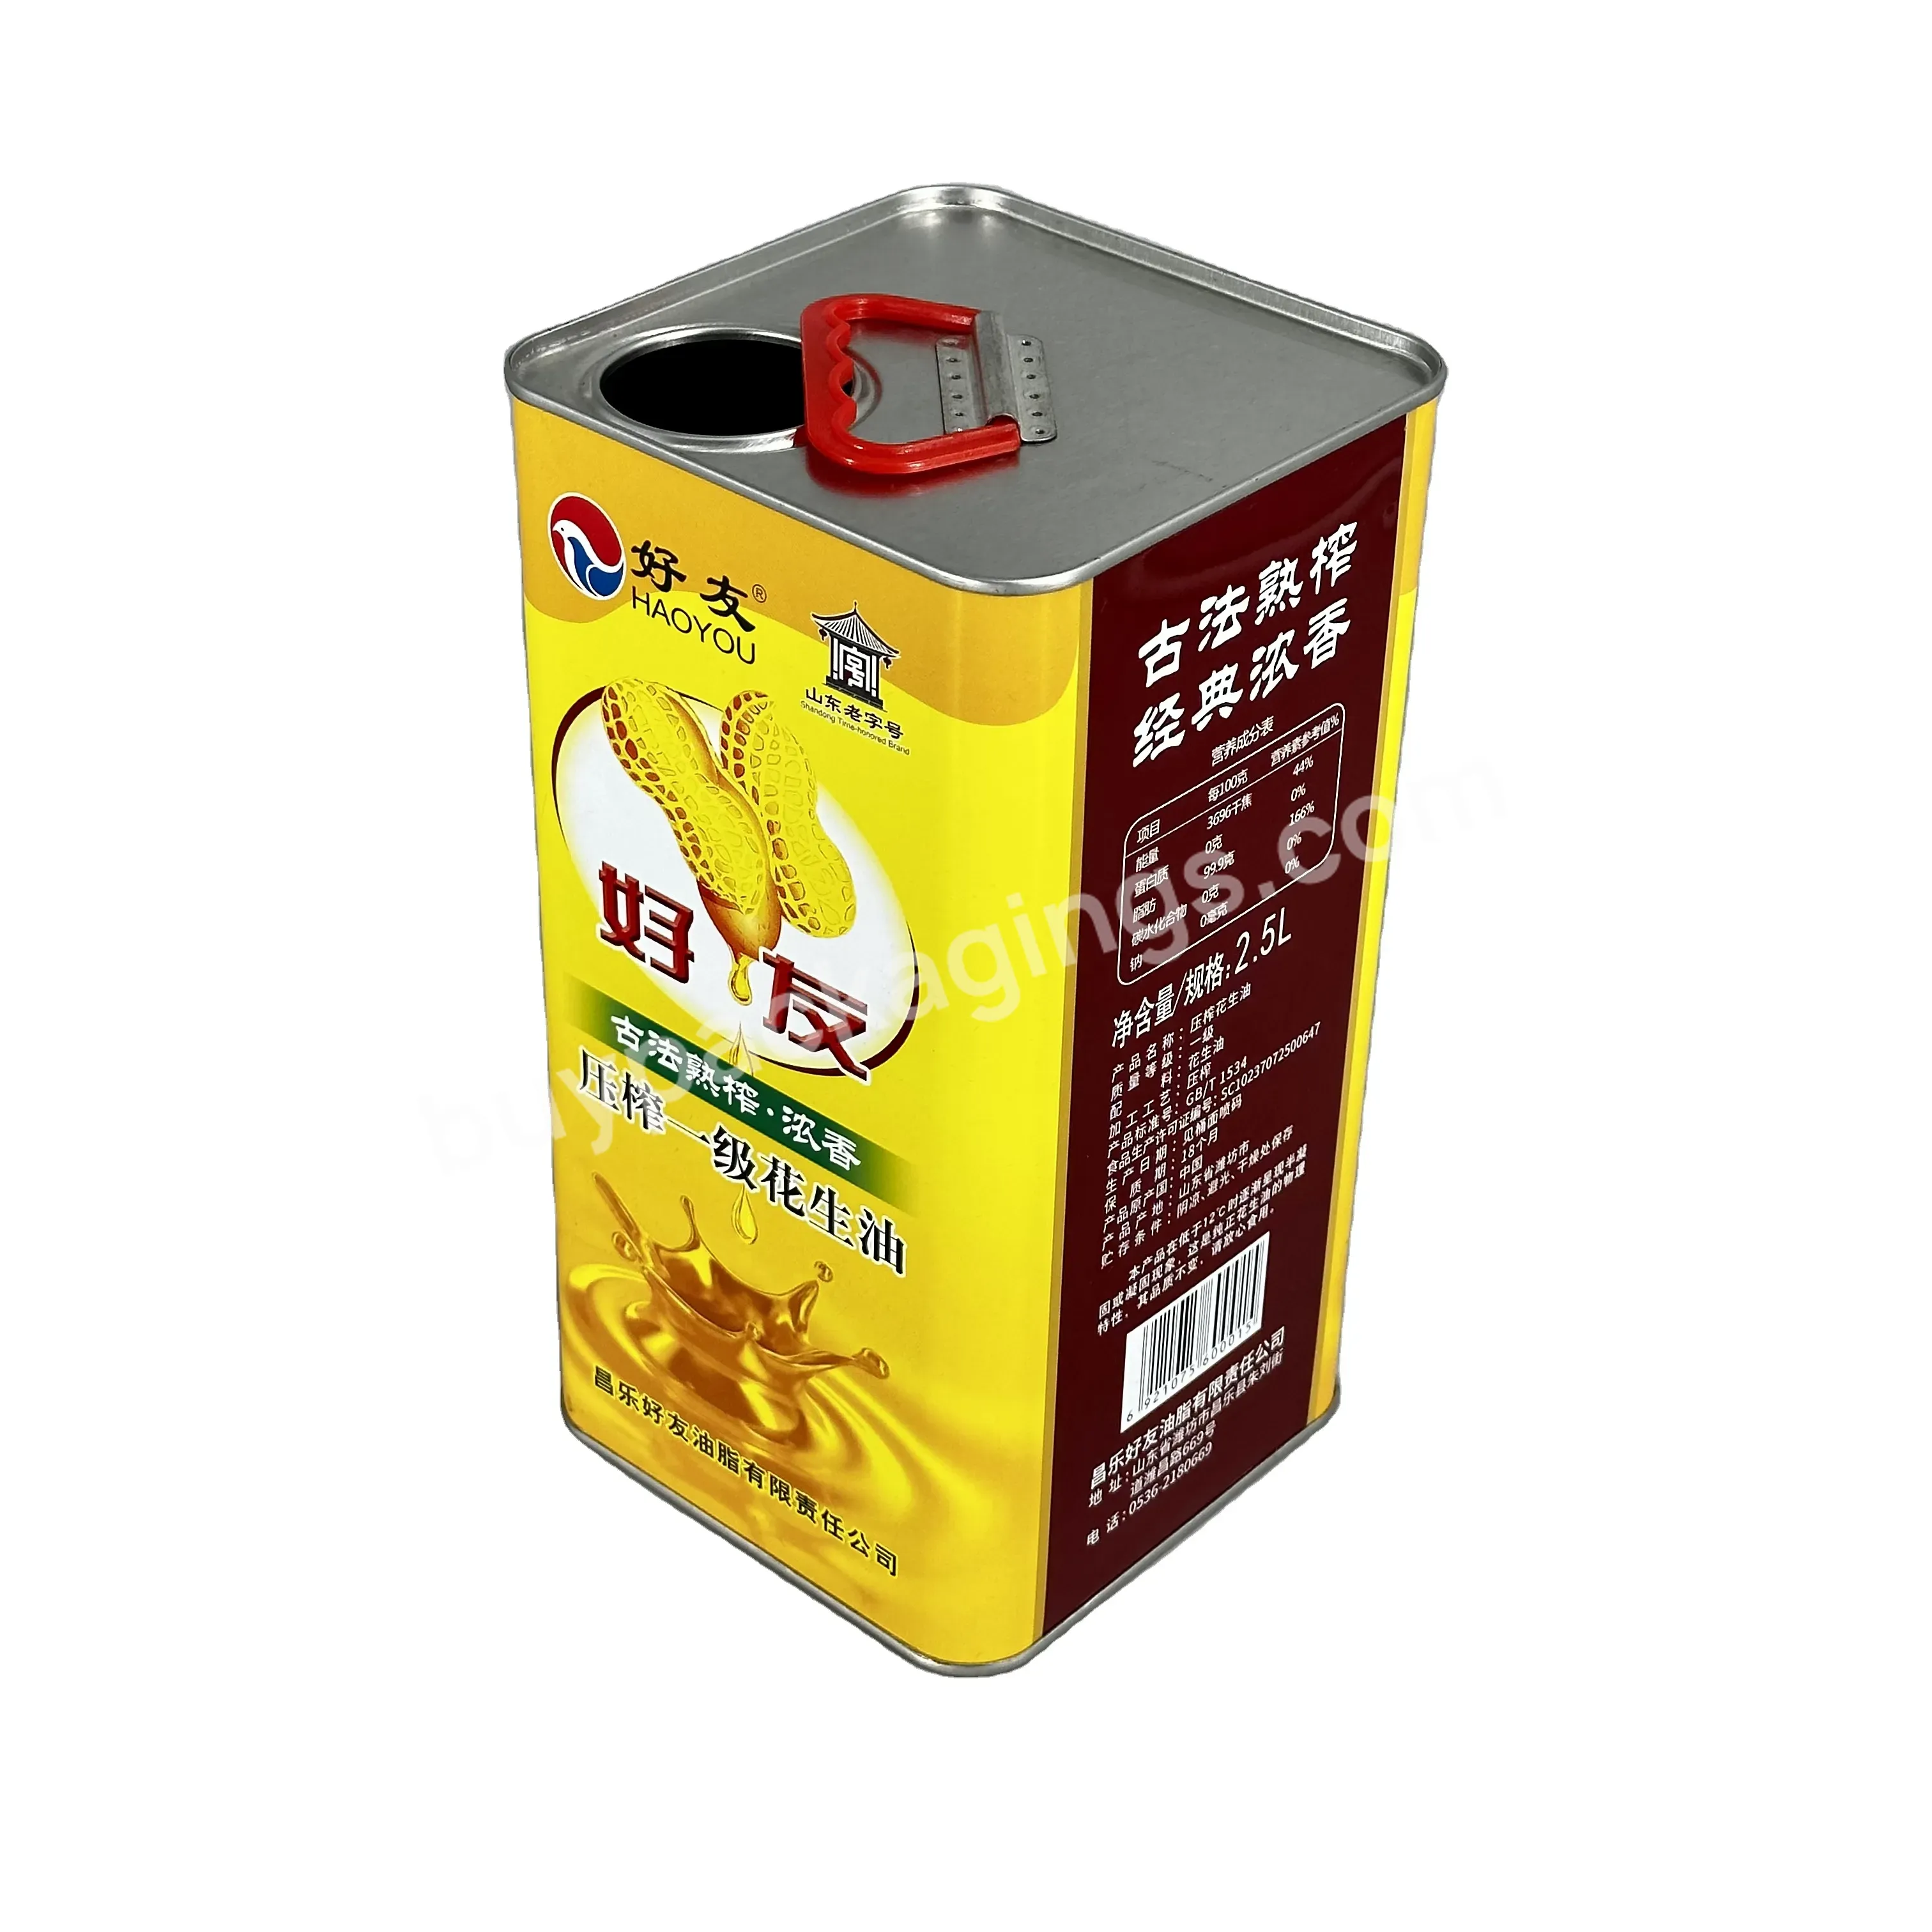 2023 Newest 2.5l Square Cooking Oil/olive Oil Tin Can Tin Cans For Food Canning With Plastic Handle And Spout Lid - Buy Tin Cans For Food Canning,2.5l Square Cooking Oil/olive Oil Tin Can,With Plastic Handle And Spout Lid.